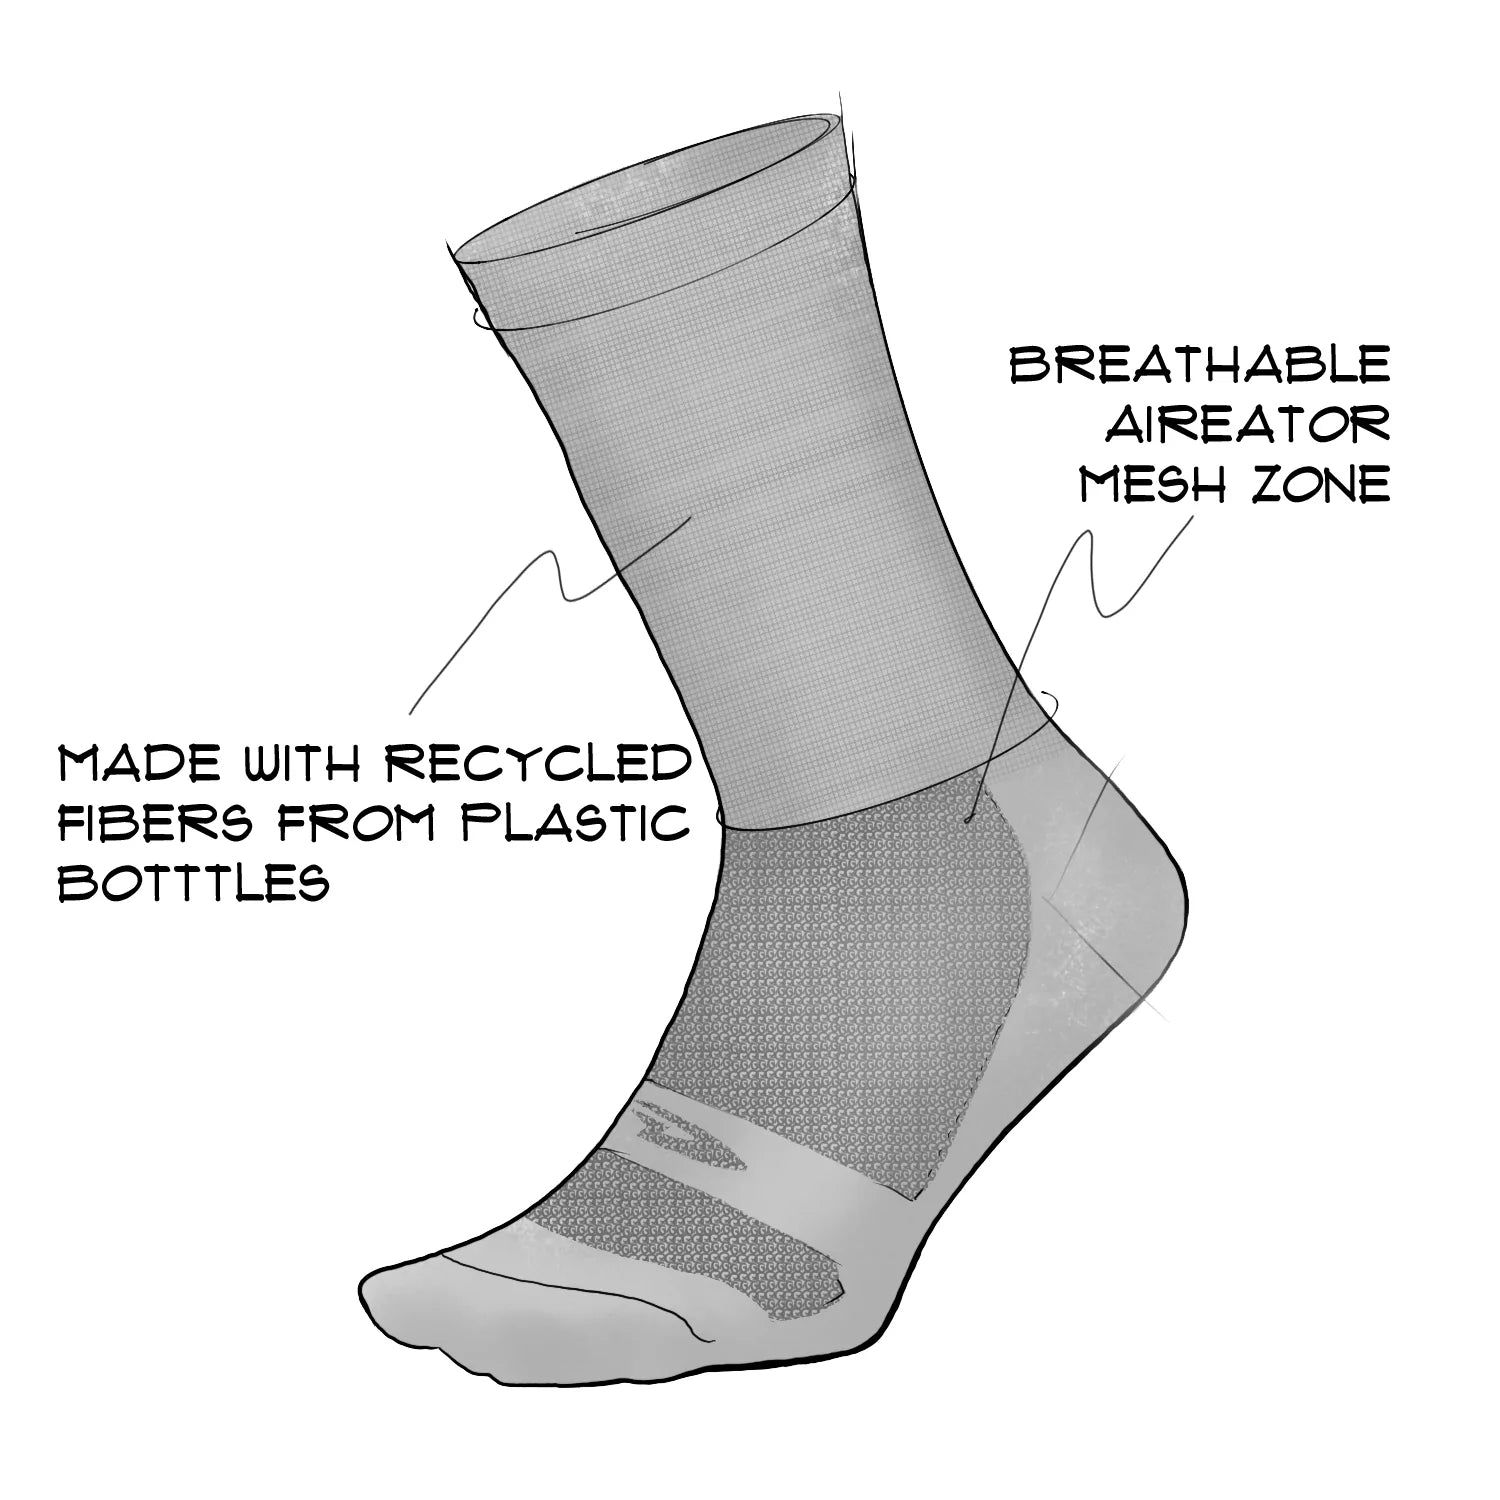 technical drawing of a DeFeet Aireator cycling sock featuring a breathable mesh weave in a moisture-wicking recycled fiber